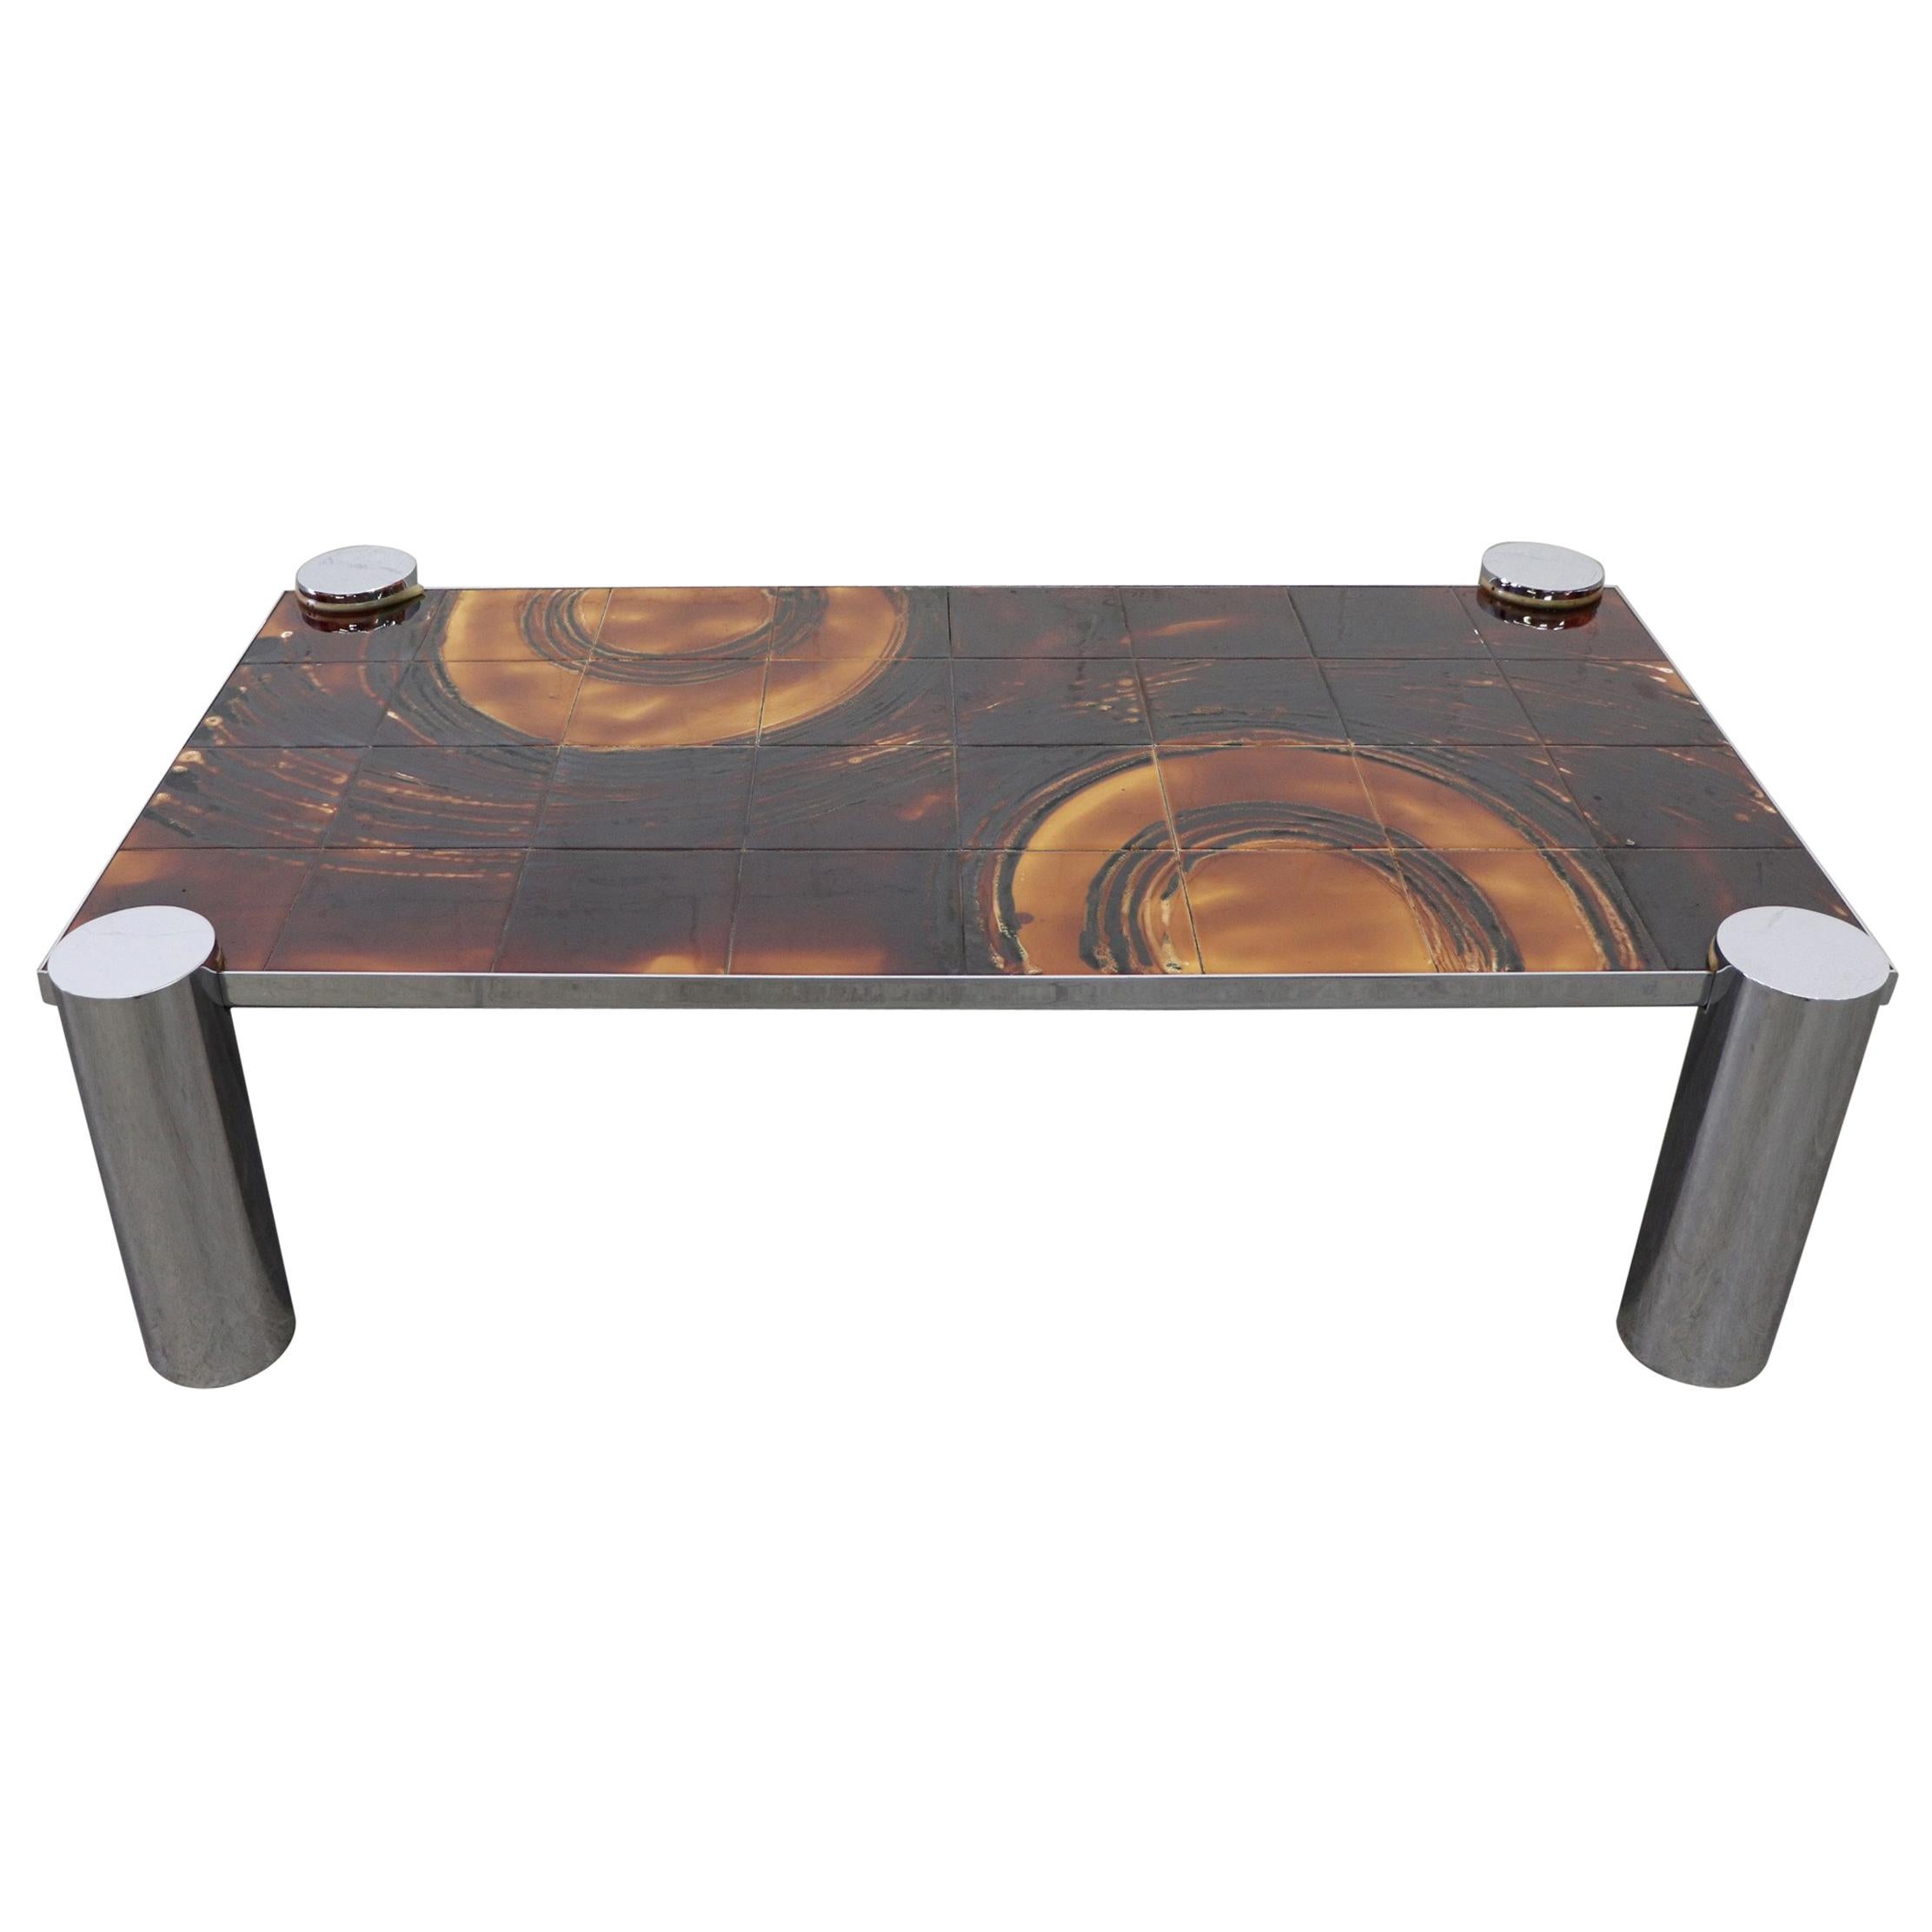 Belarti Style Ceramic Tile Topped Coffee Table